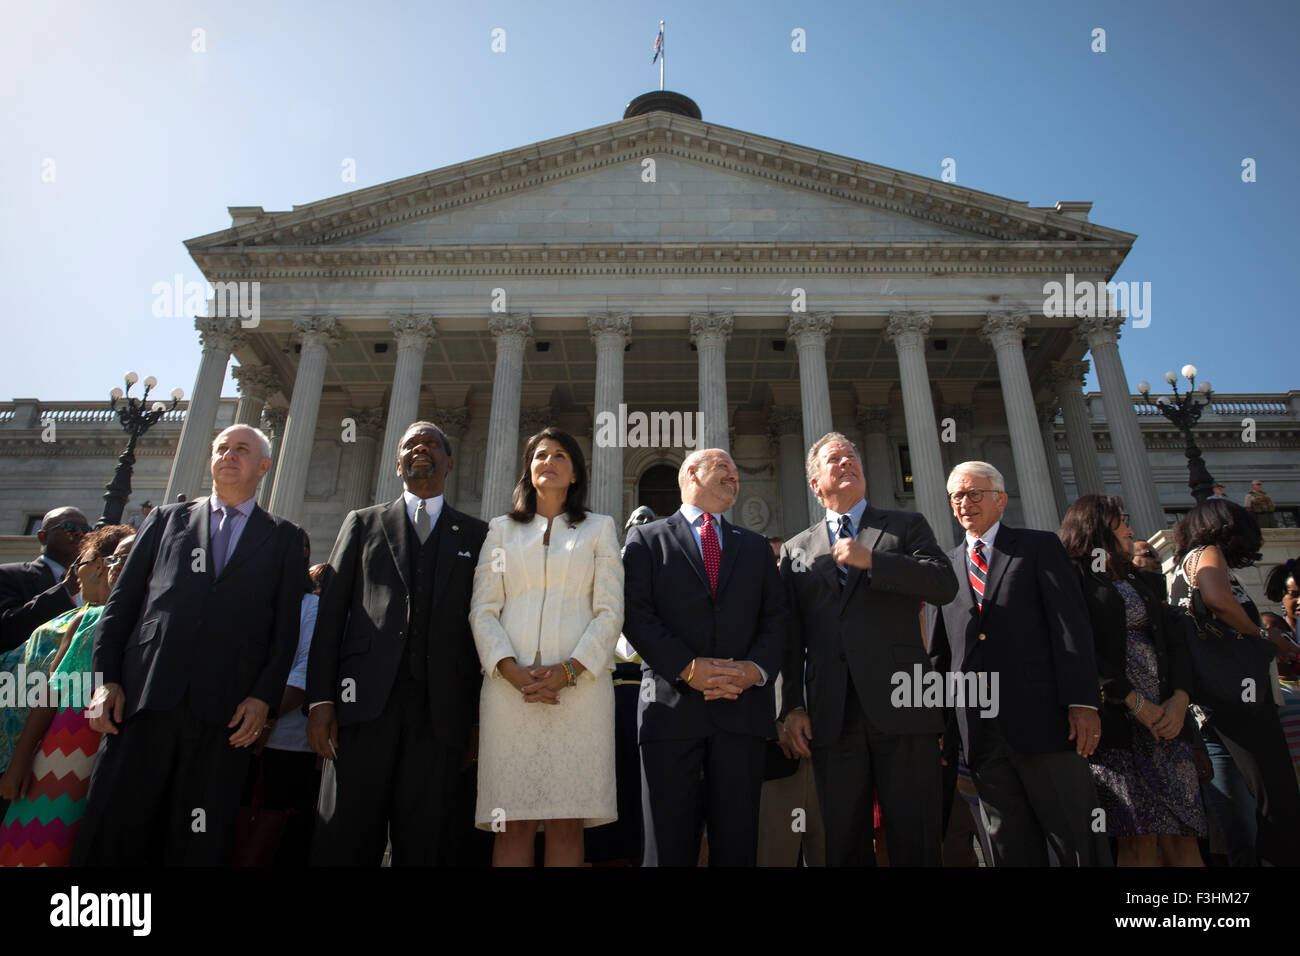 South Carolina Governor Nikki Haley is joined by politicians to watch the removal of the Confederate Flag from the State House July 10, 2015 in Columbia, South Carolina.  Joining Haley are (L to R):  Former Governor Jim Hodges, Emanuel AME Rev. Norvel Goff, Governor Nikki Haley, First Gentleman Michael Haley, Governor David Beasley, and Charleston Mayor Joe Riley. Stock Photo